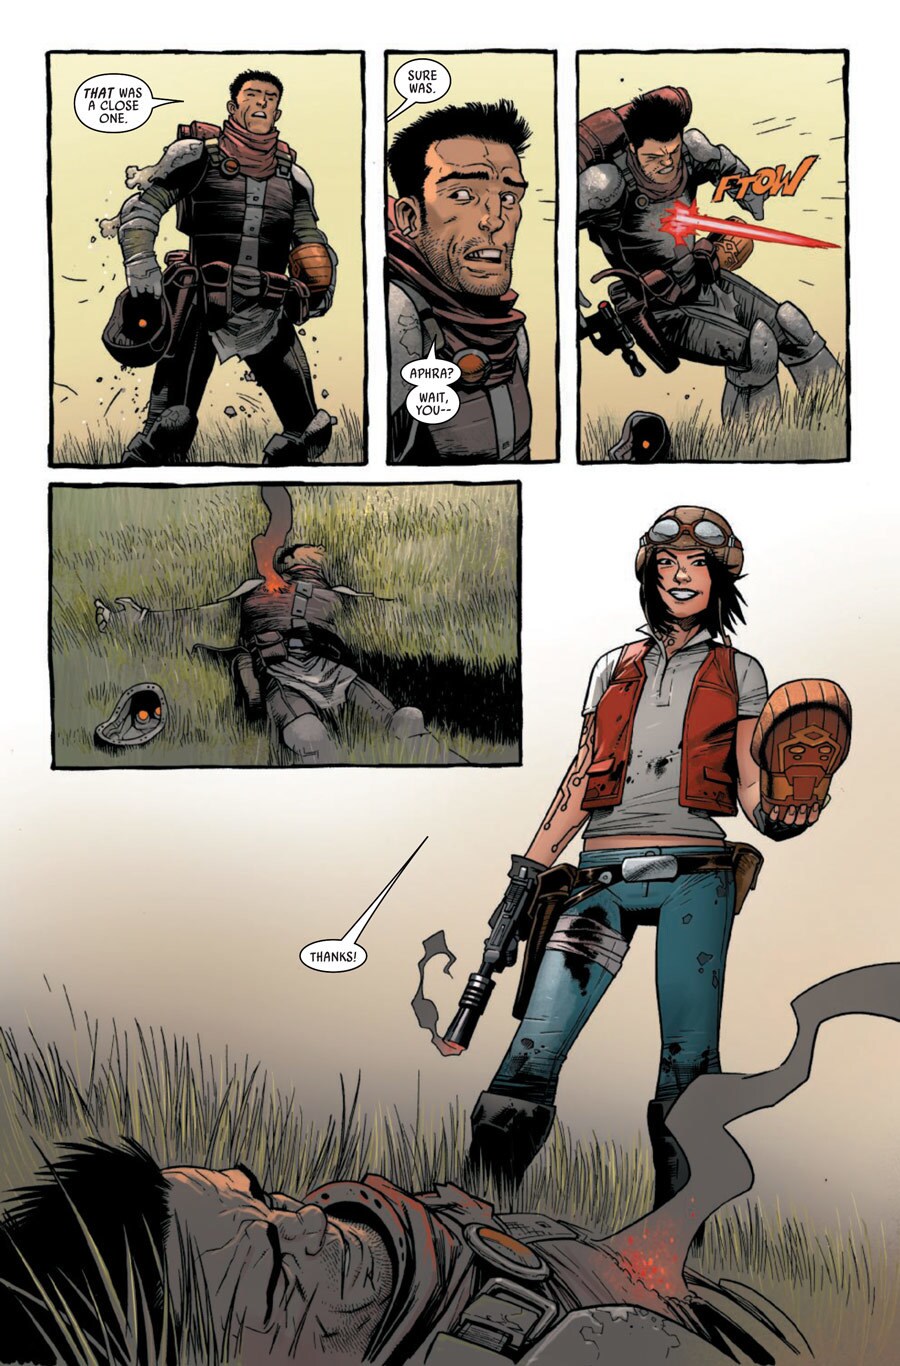 A page from the Doctor Aphra comic book.